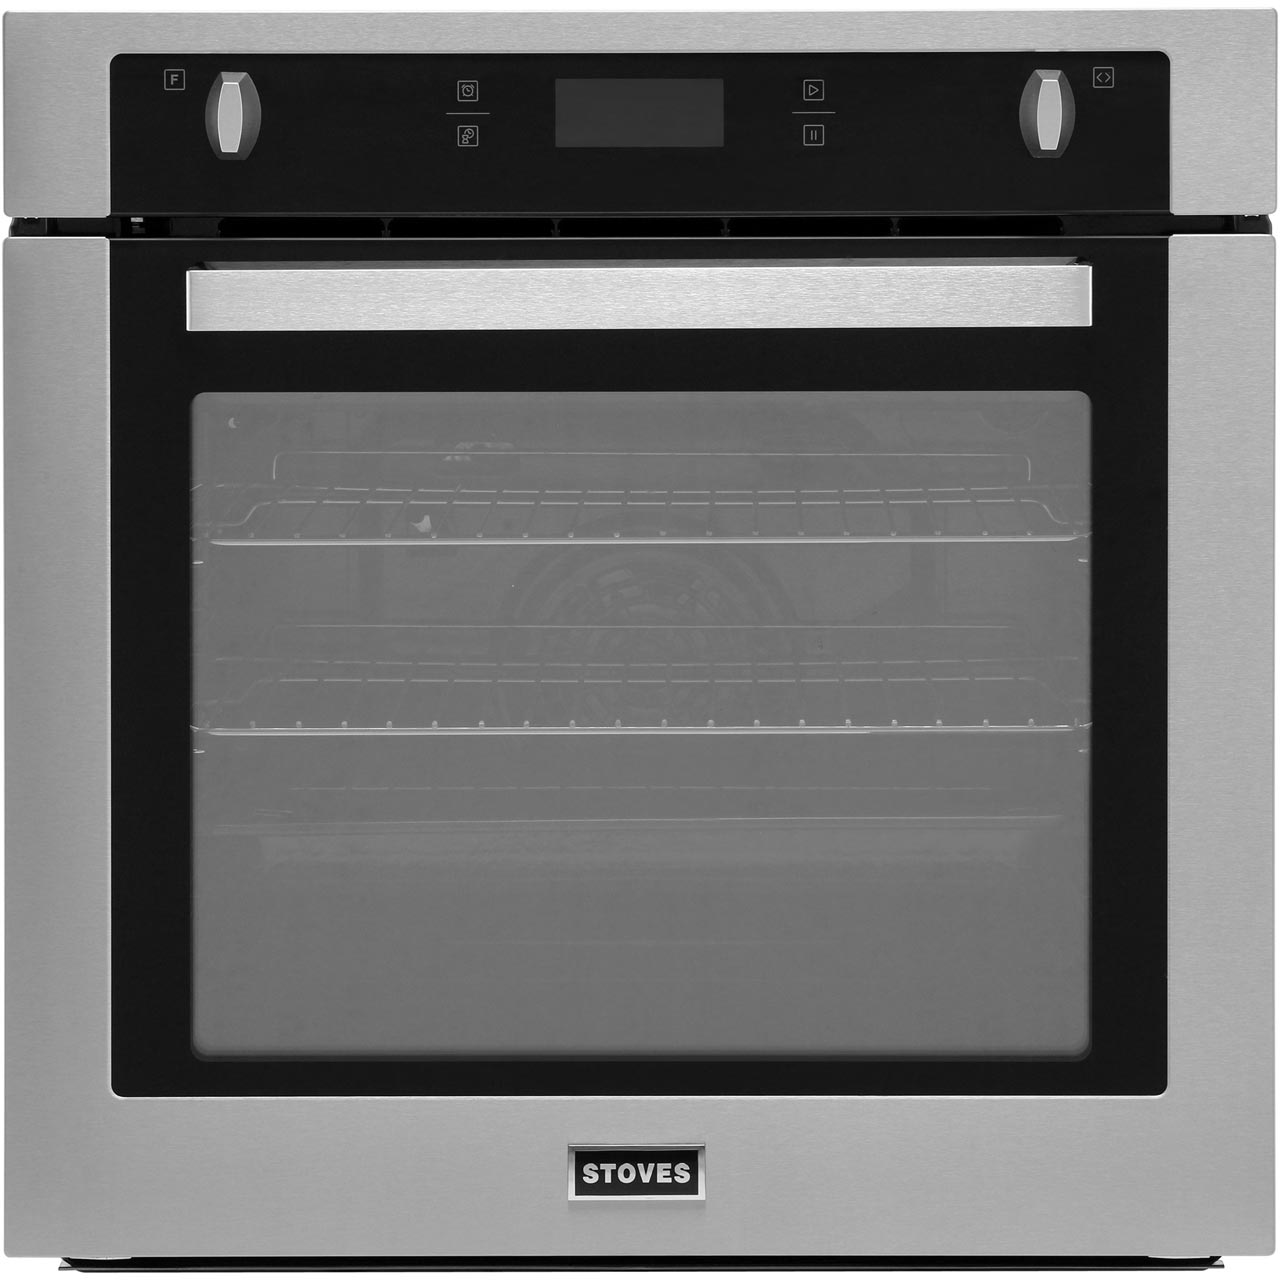 Stoves SEB602PY Built In Electric Single Oven and Pyrolytic Cleaning - Stainless Steel - A Rated, Stainless Steel